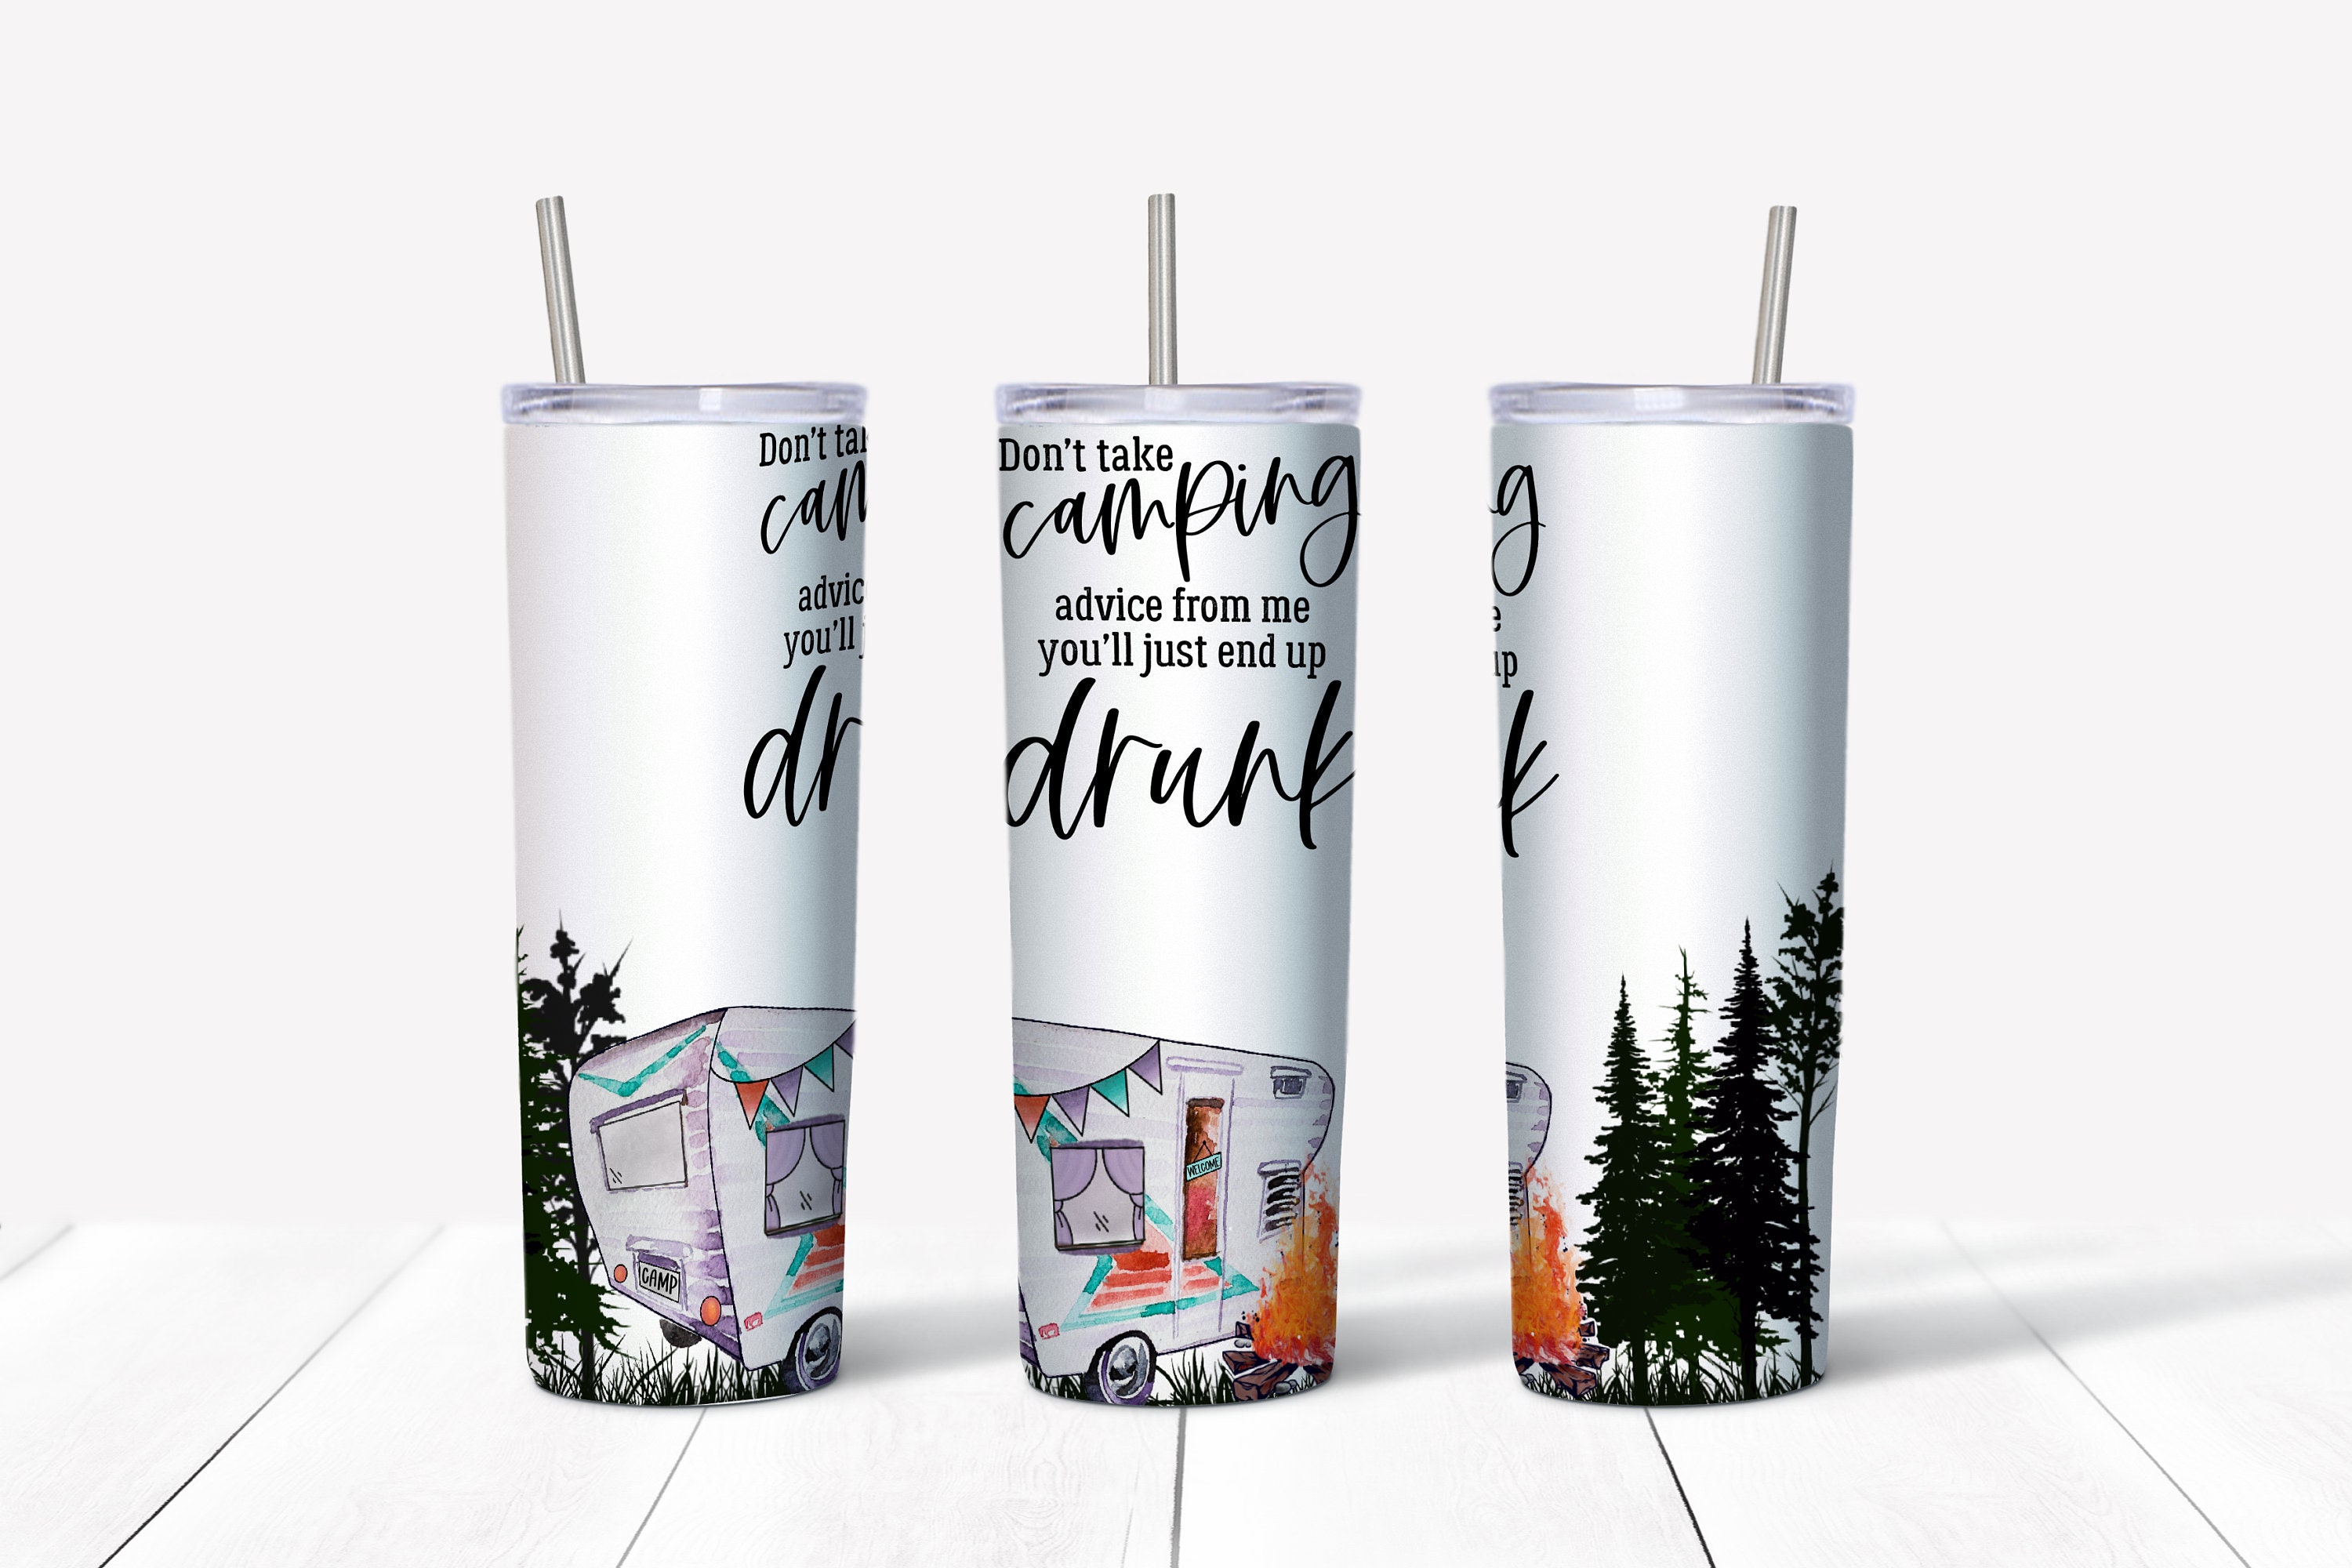 Personalized Camping Where Friend And Marshmallows Tumbler - Teeruto